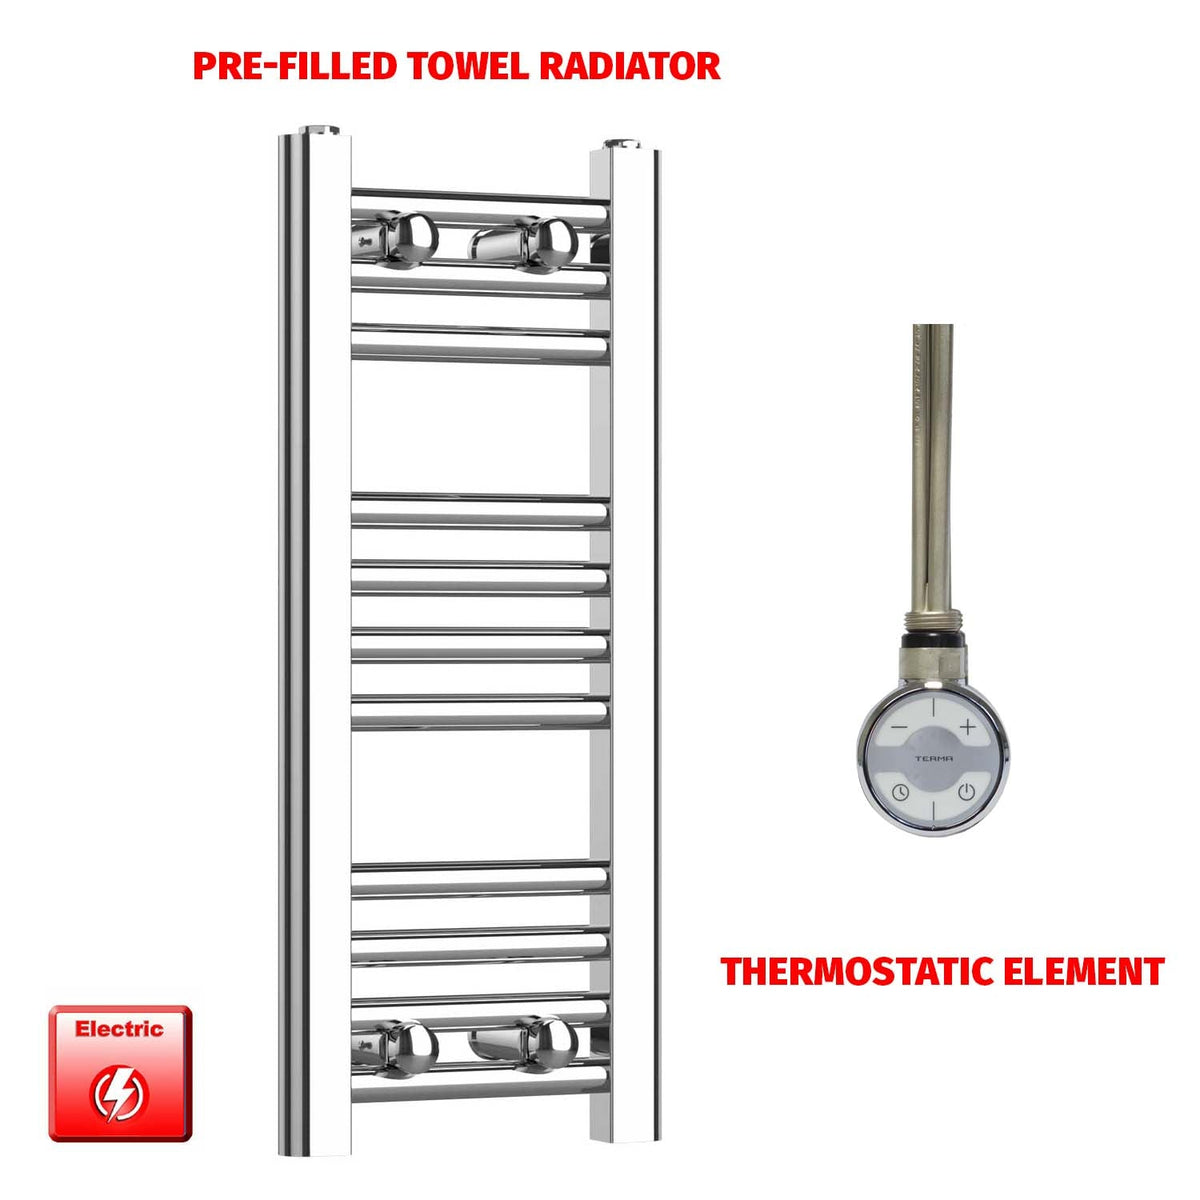 600 x 250 Pre-Filled Electric Heated Towel Radiator Straight Chrome MOA Element No Timer